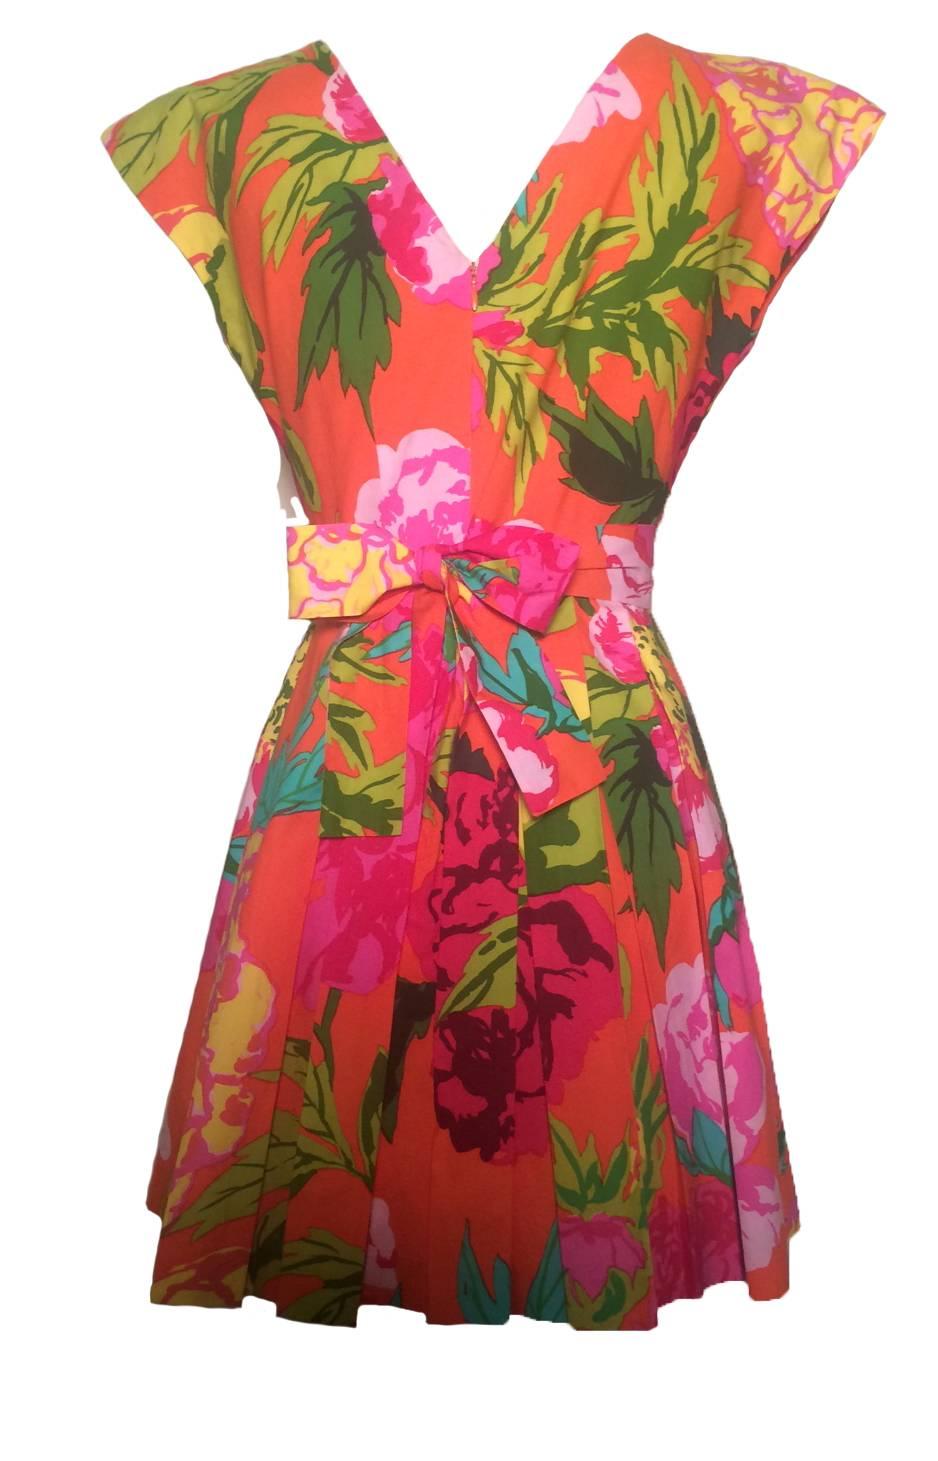 Moschino Couture! 1990 pink floral print dress. Back zip, tie at waist. 

Made in Italy.

No size tag, estimated IT 40, US 4. 
Bust 34